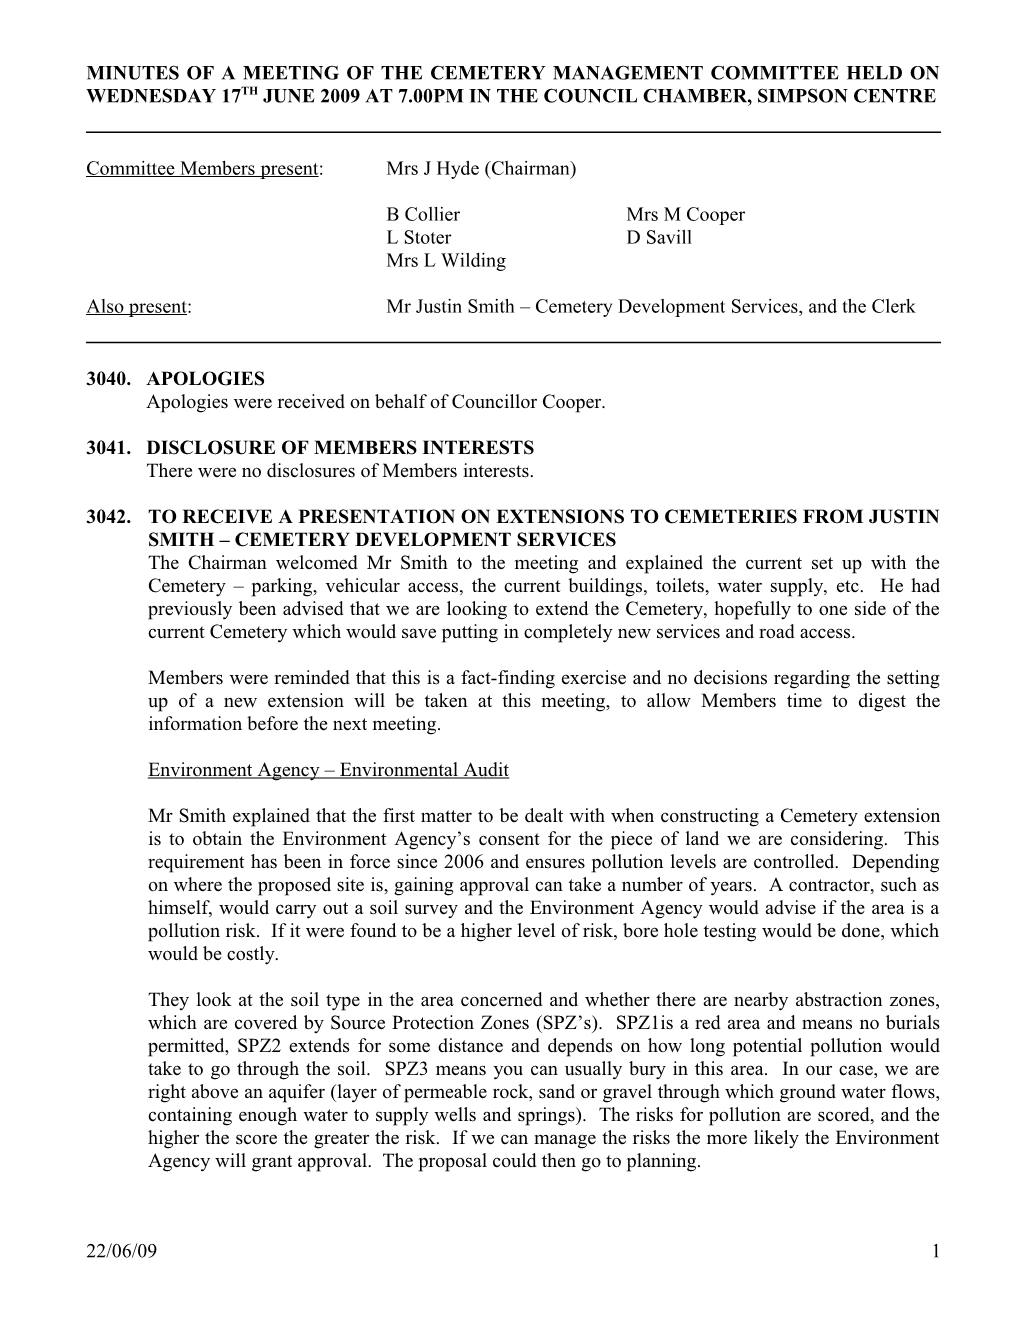 Minutes of a Meeting of the Cemetery Management Committee Held on Wednesday 17Th June 2009 at 7